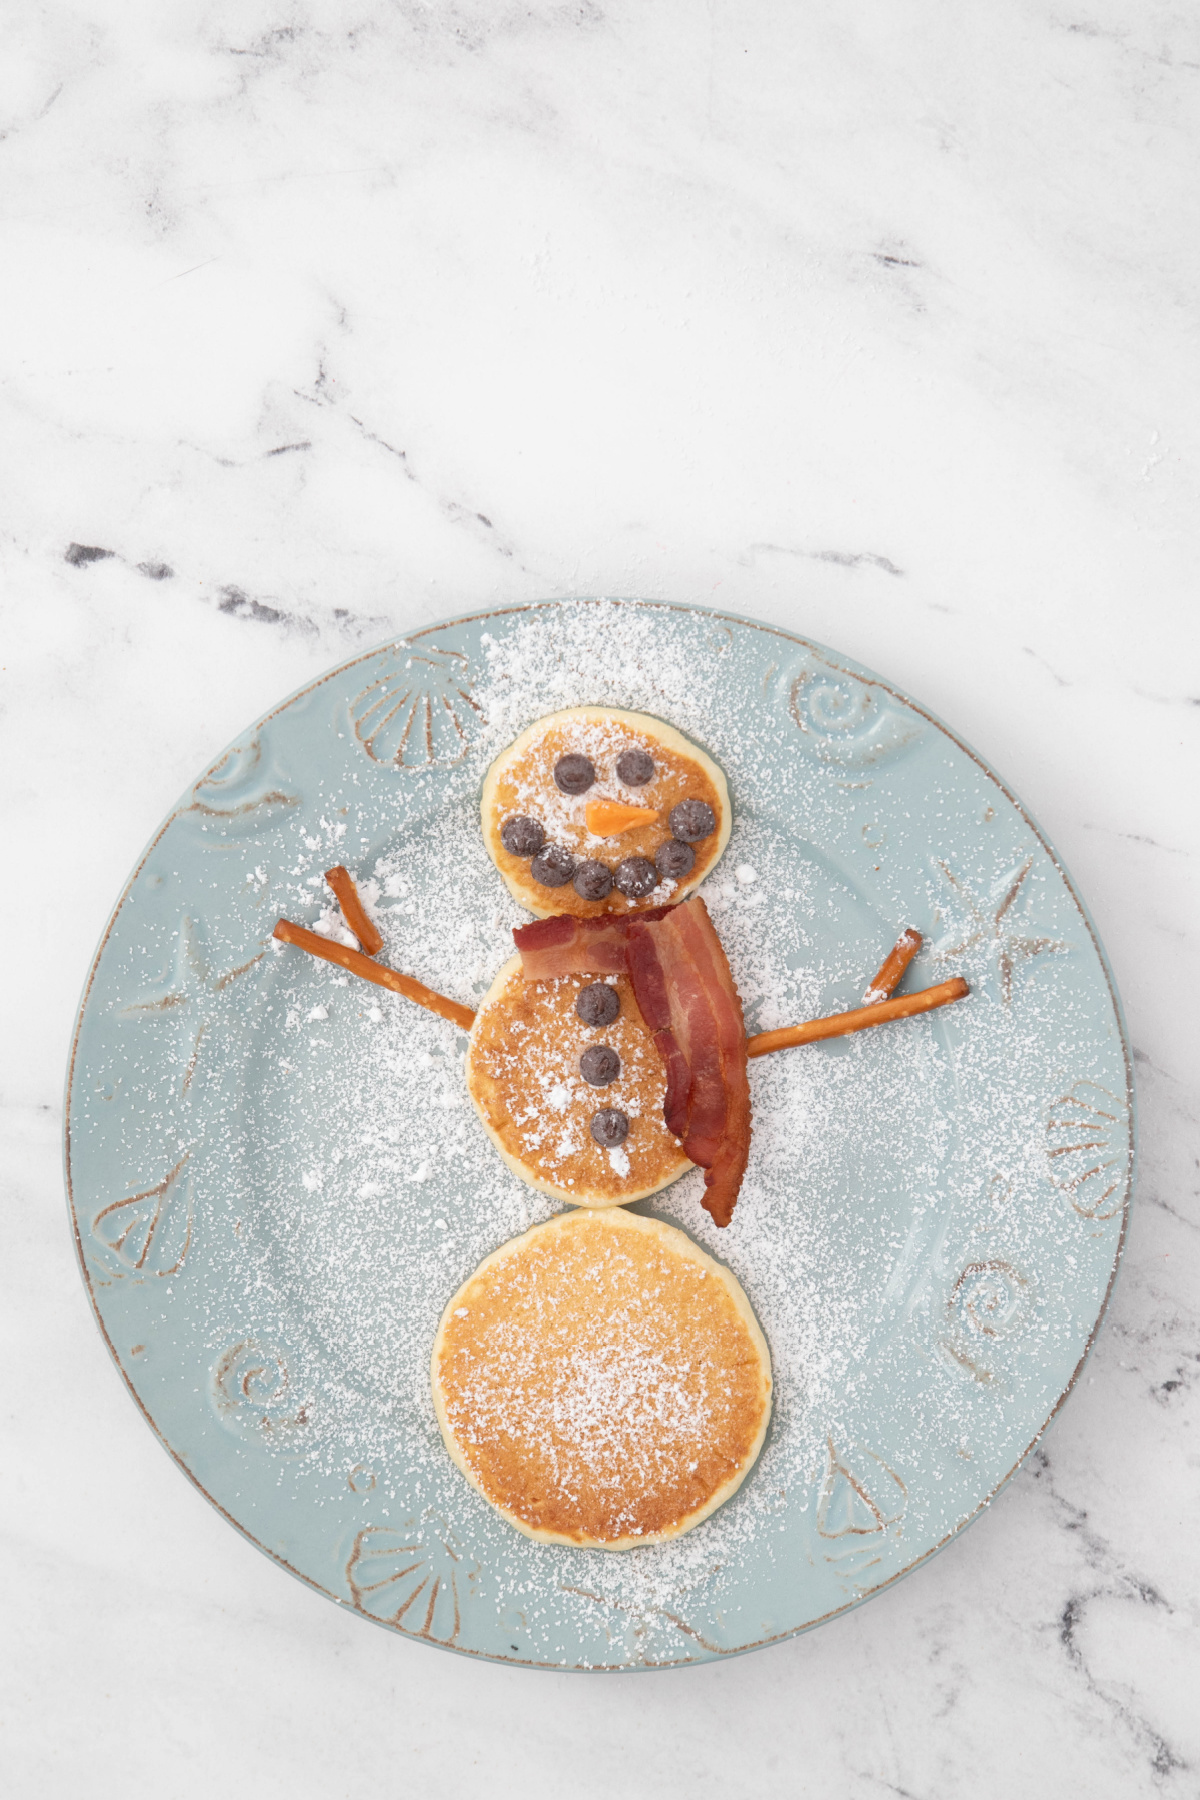 Snowman pancakes with pretzel arms added on a plate with powdered sugar.